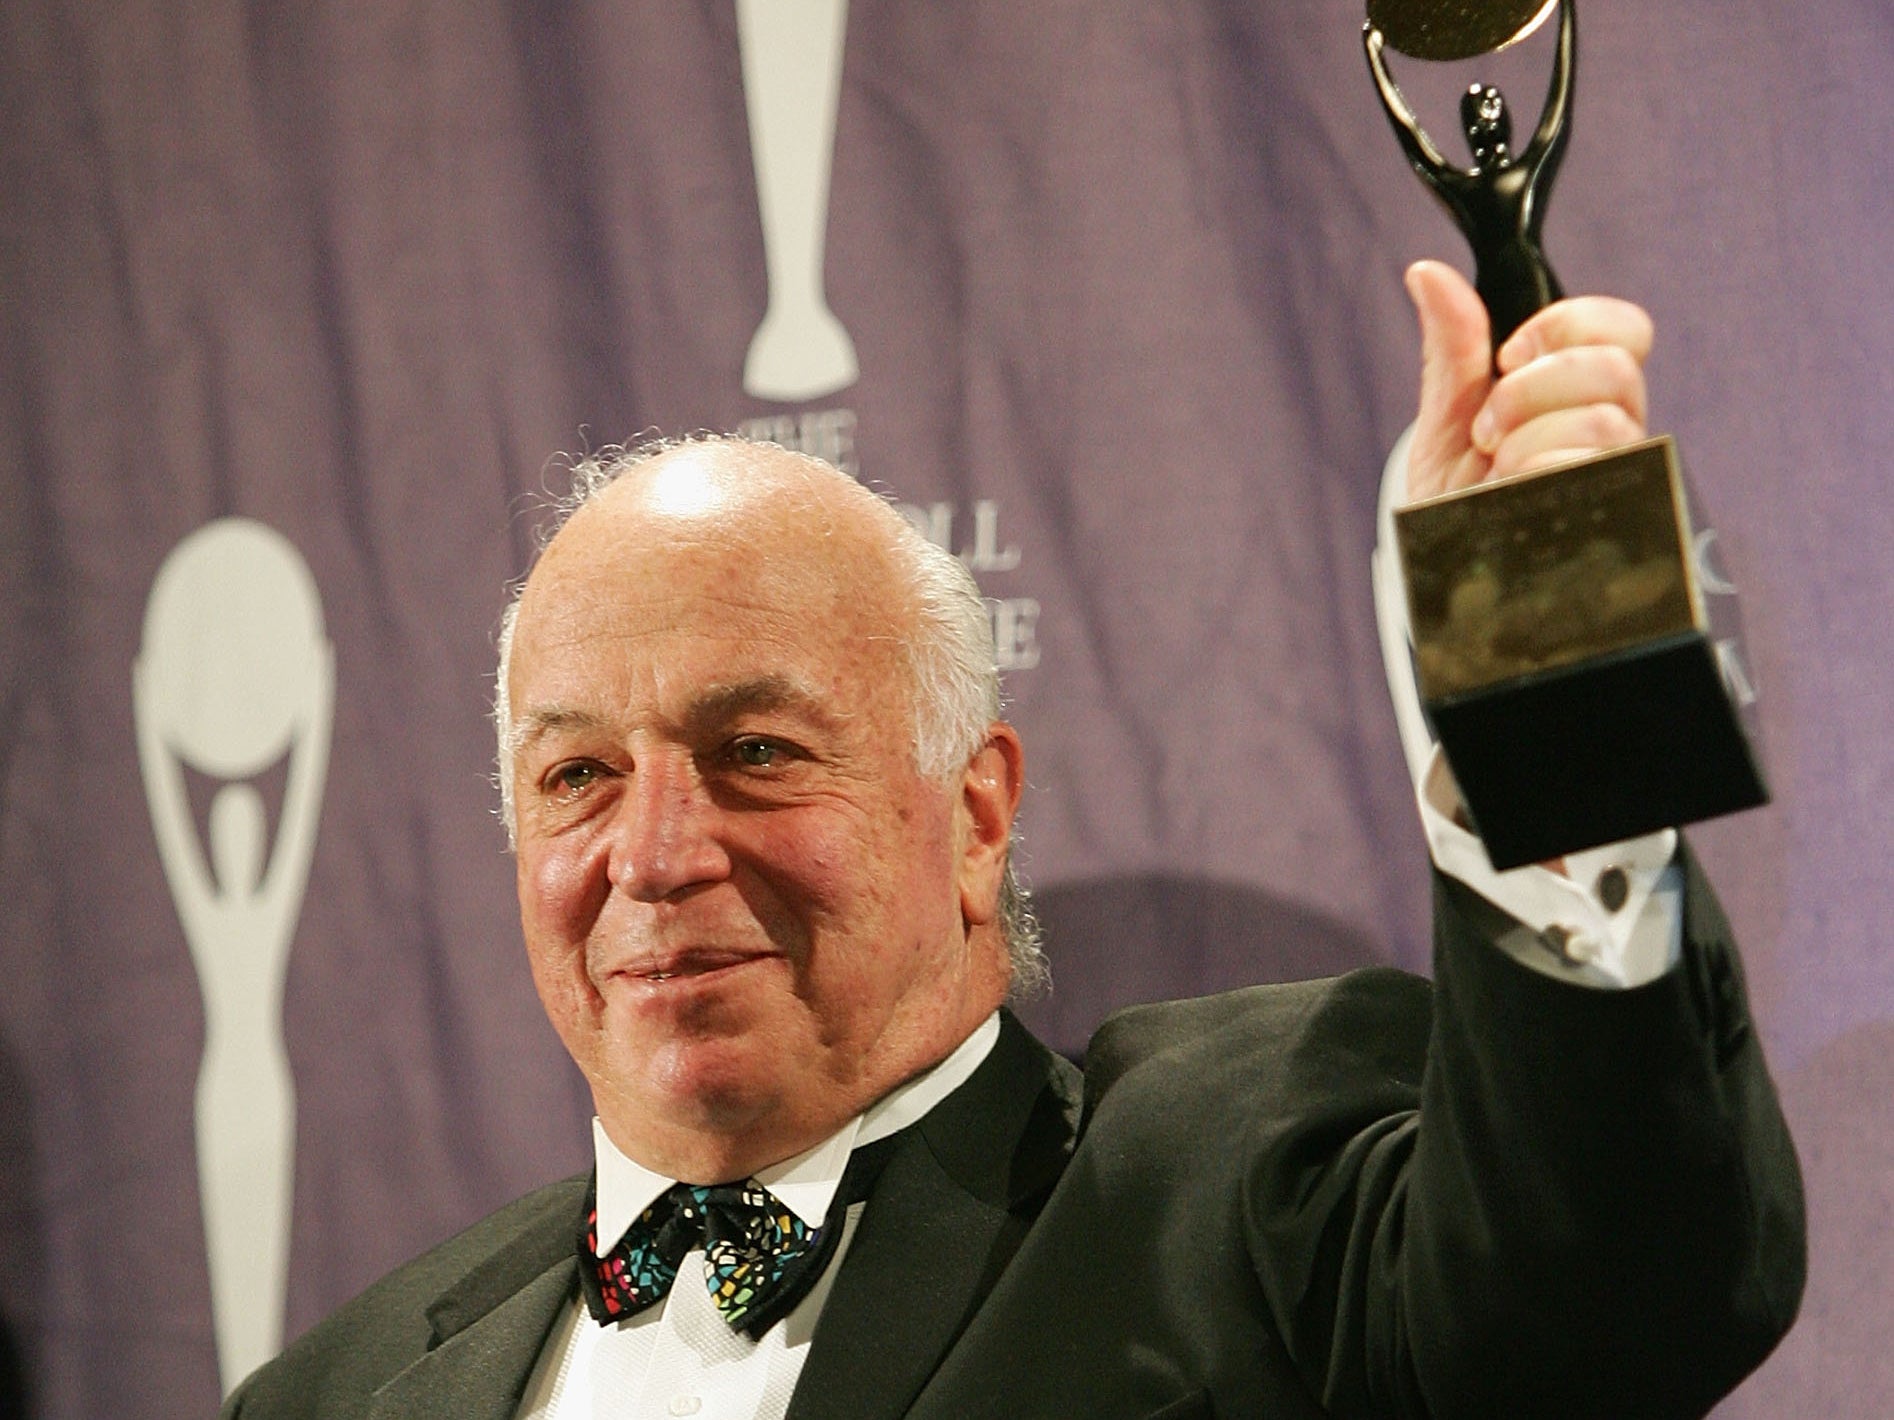 Seymour Stein worked with the likes of the Ramones and Depeche Mode